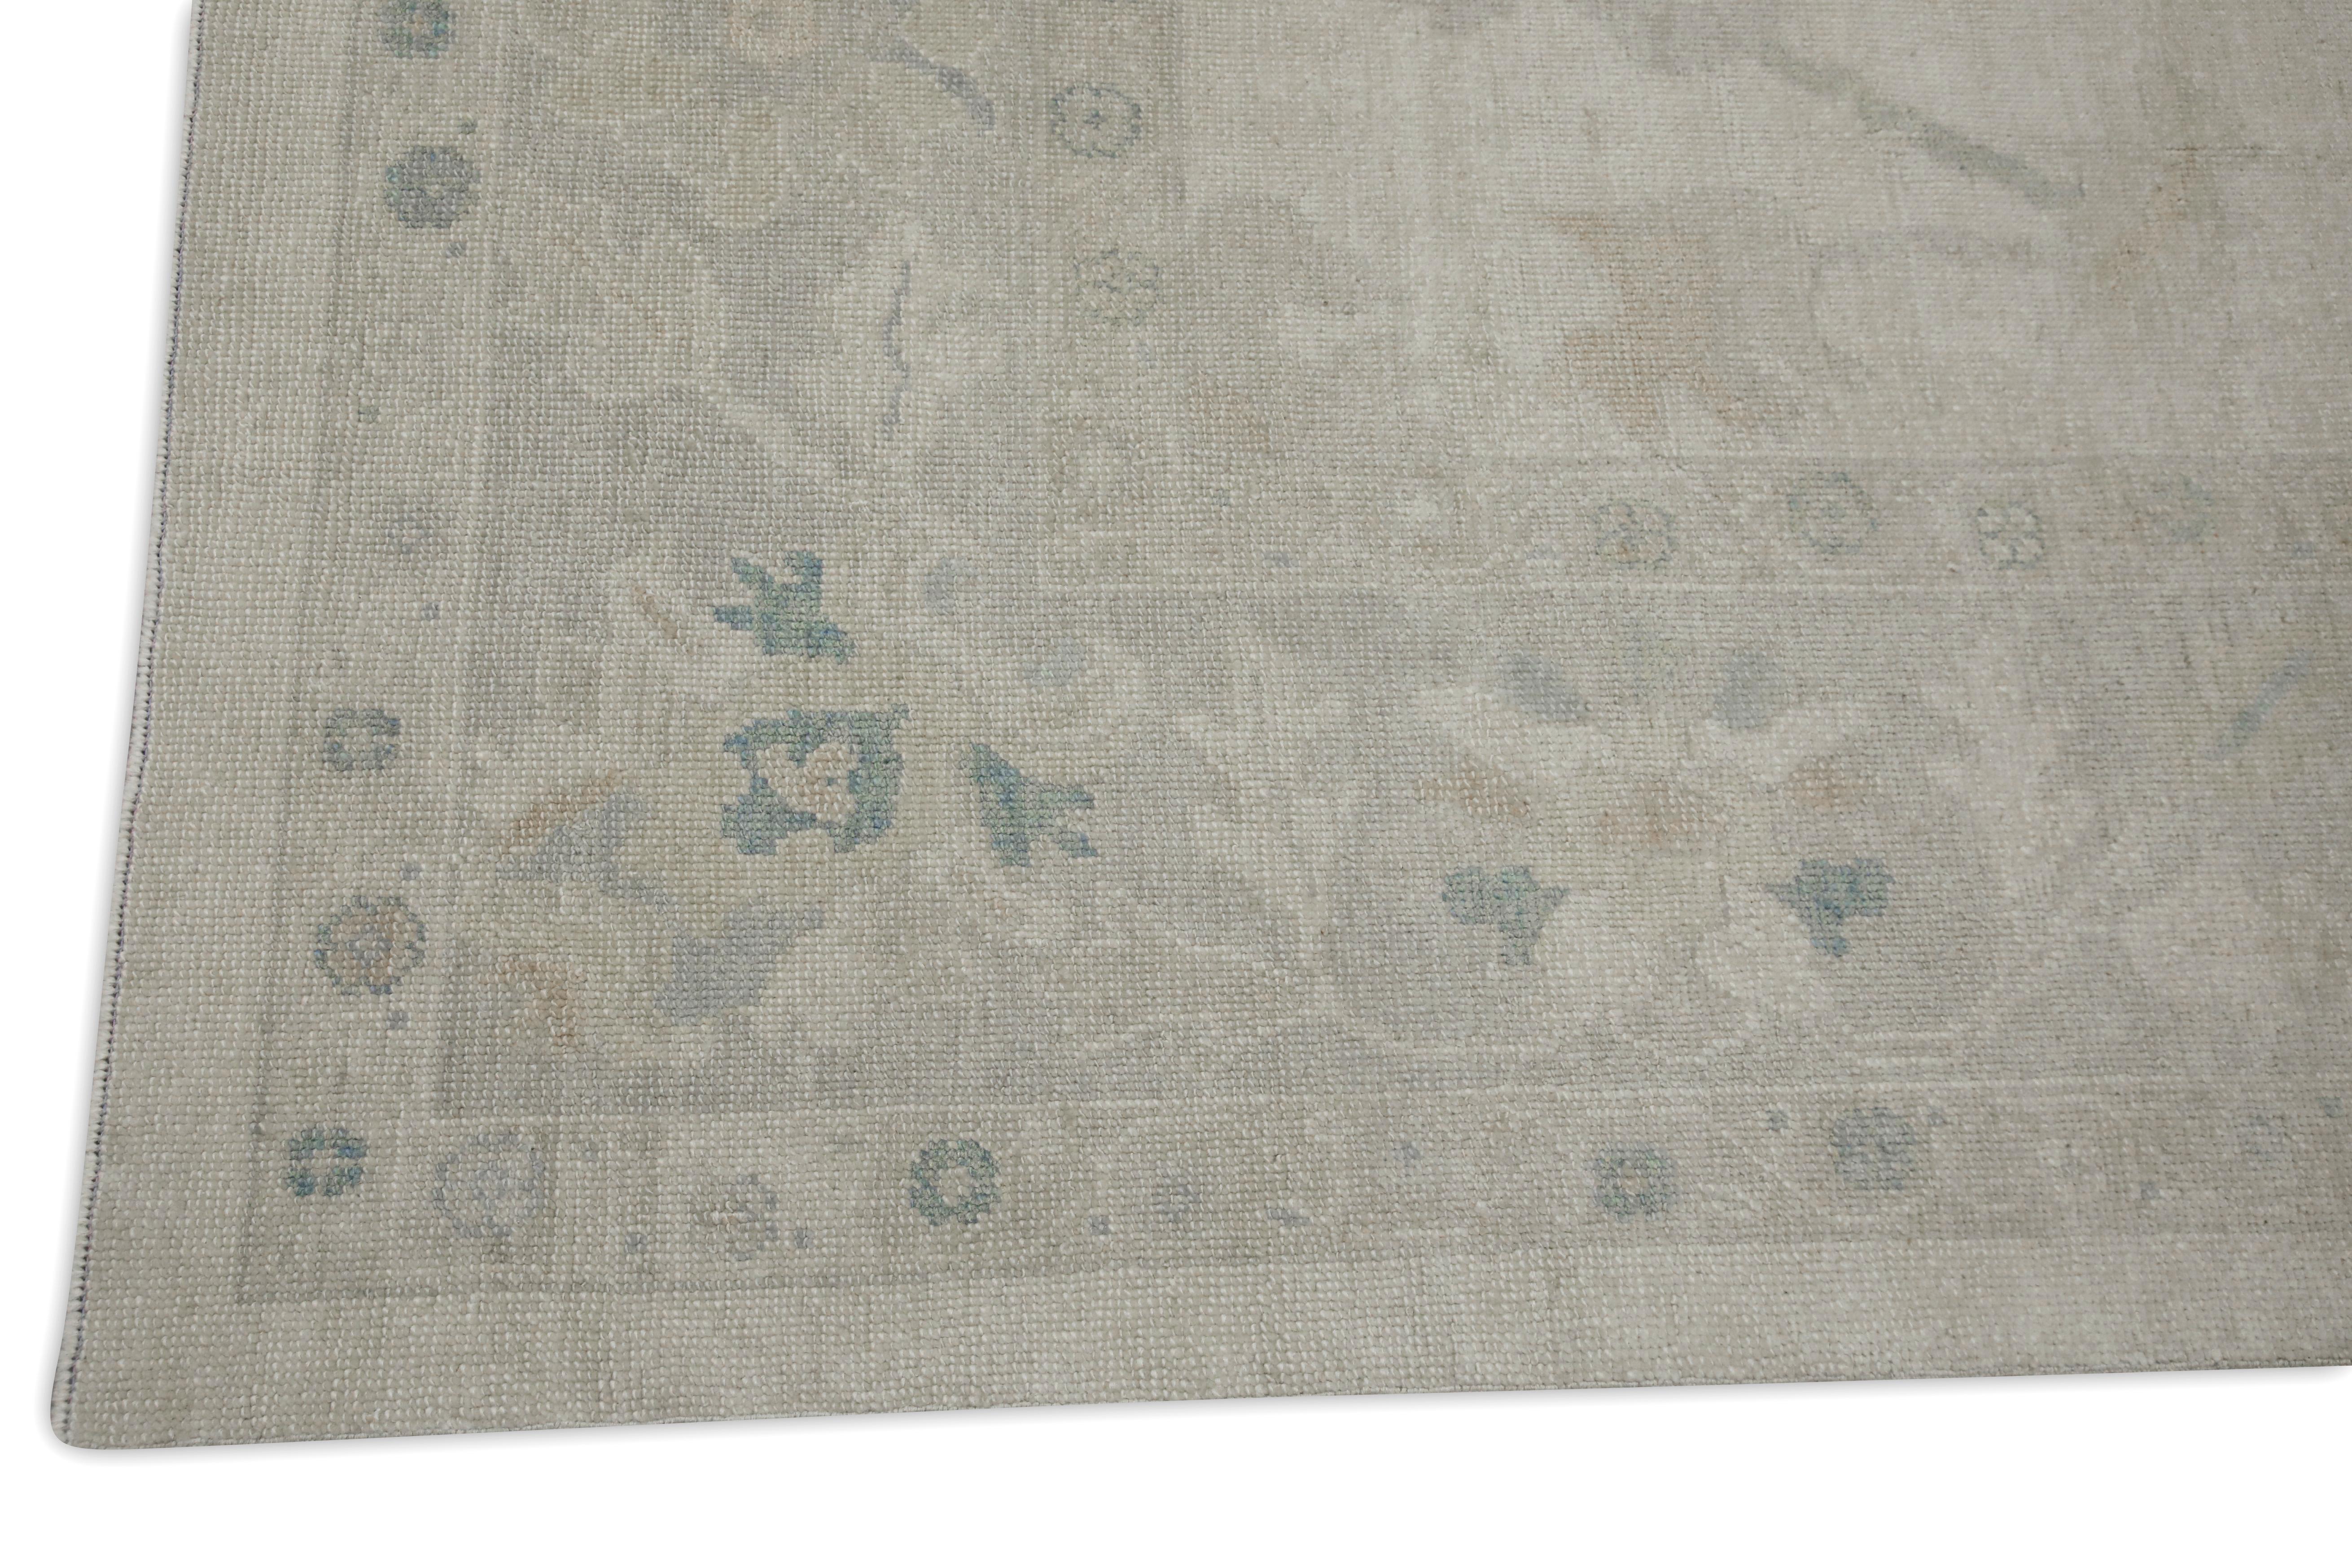 Vegetable Dyed Taupe Floral Design Handwoven Wool Turkish Oushak Rug 10'8